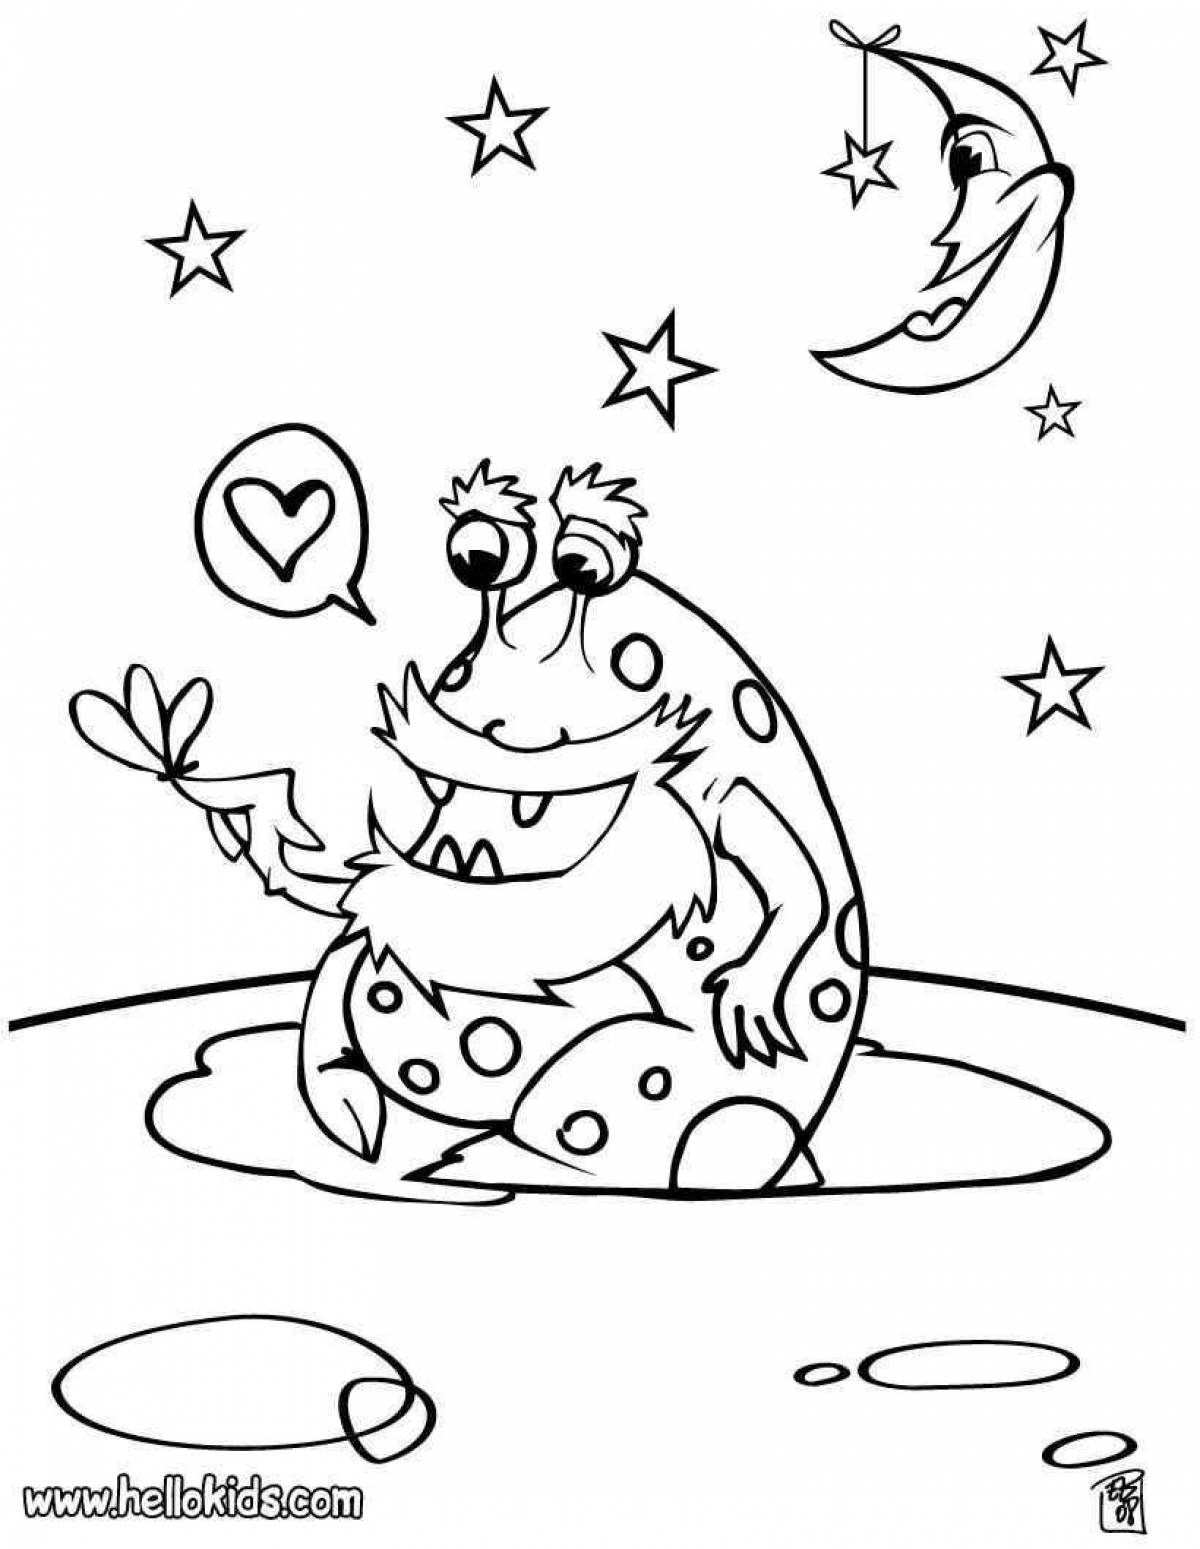 Cute alien coloring pages for kids